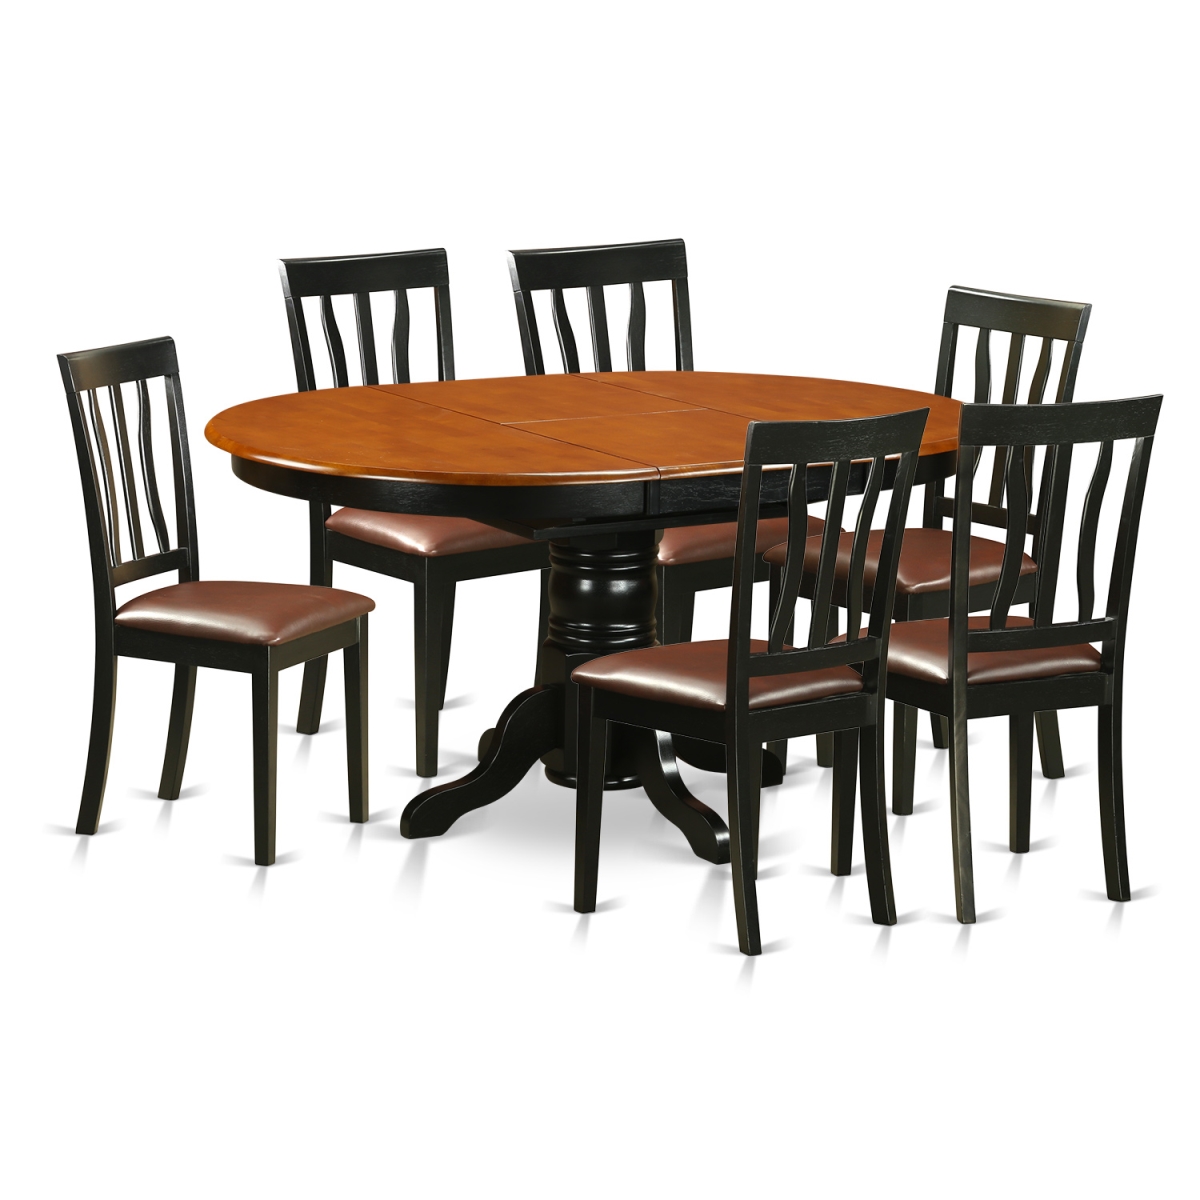 Picture of East West Furniture AVAT7-BLK-LC Faux Leather Dining Set with 6 Wooden Chairs, Black & Cherry - 7 Piece